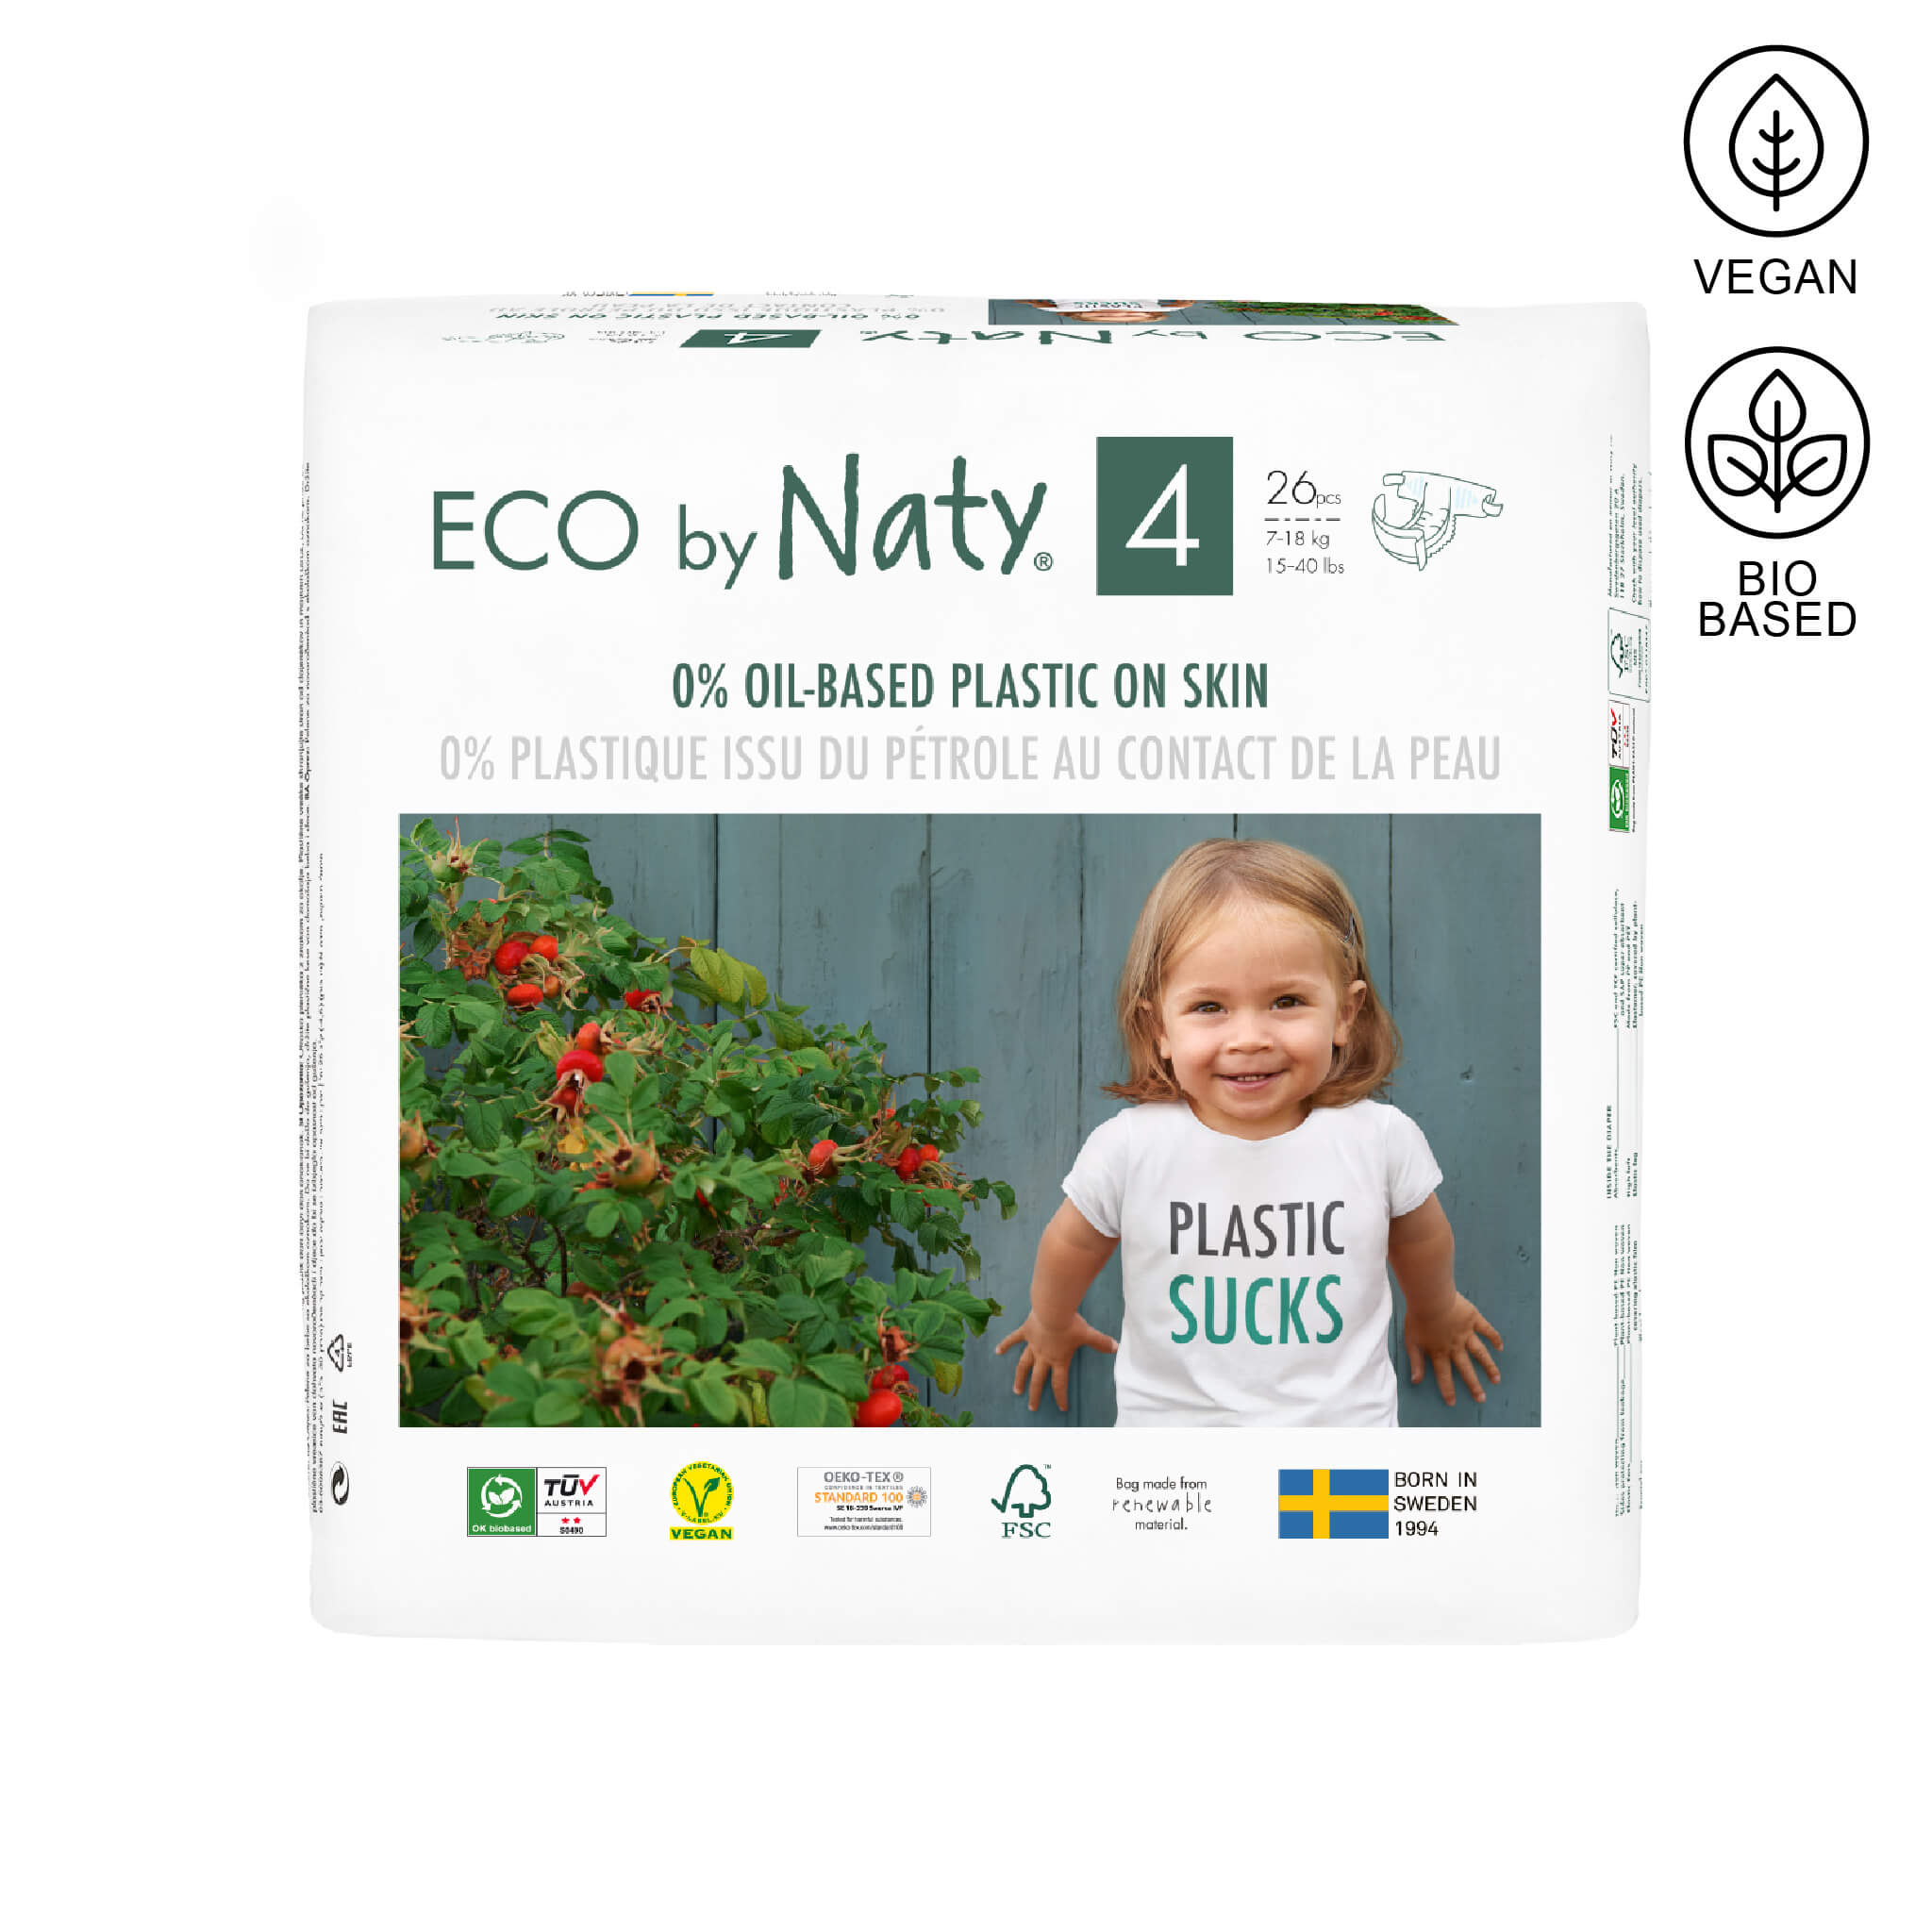 Eco by Naty Size 4 diapers package of 26 units.